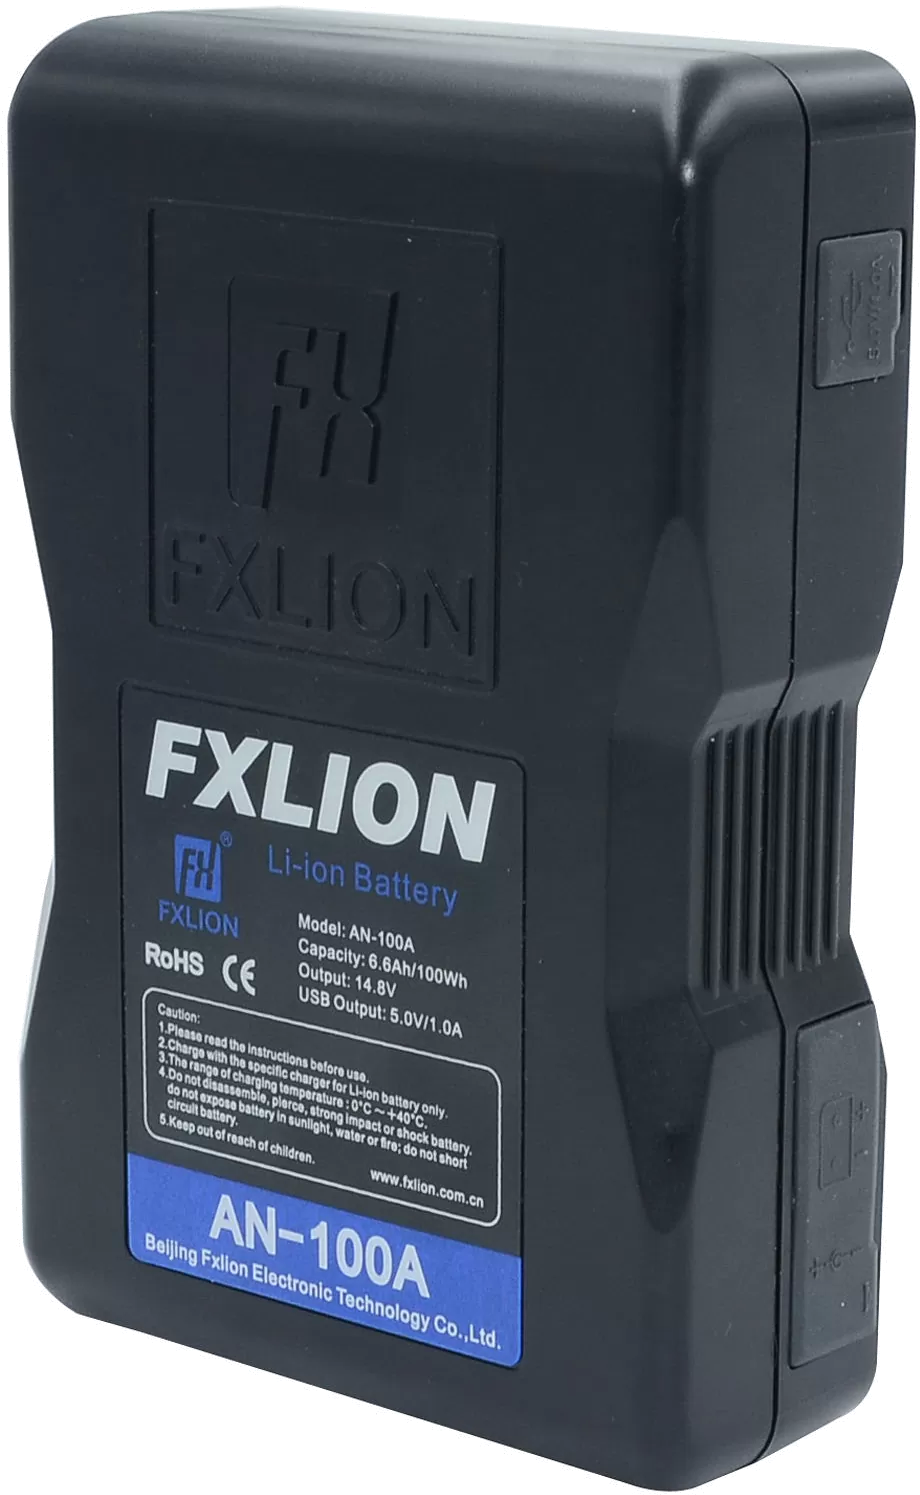 Fxlion Cool Black Series 14.8V Lithium-Ion Battery AN-100A